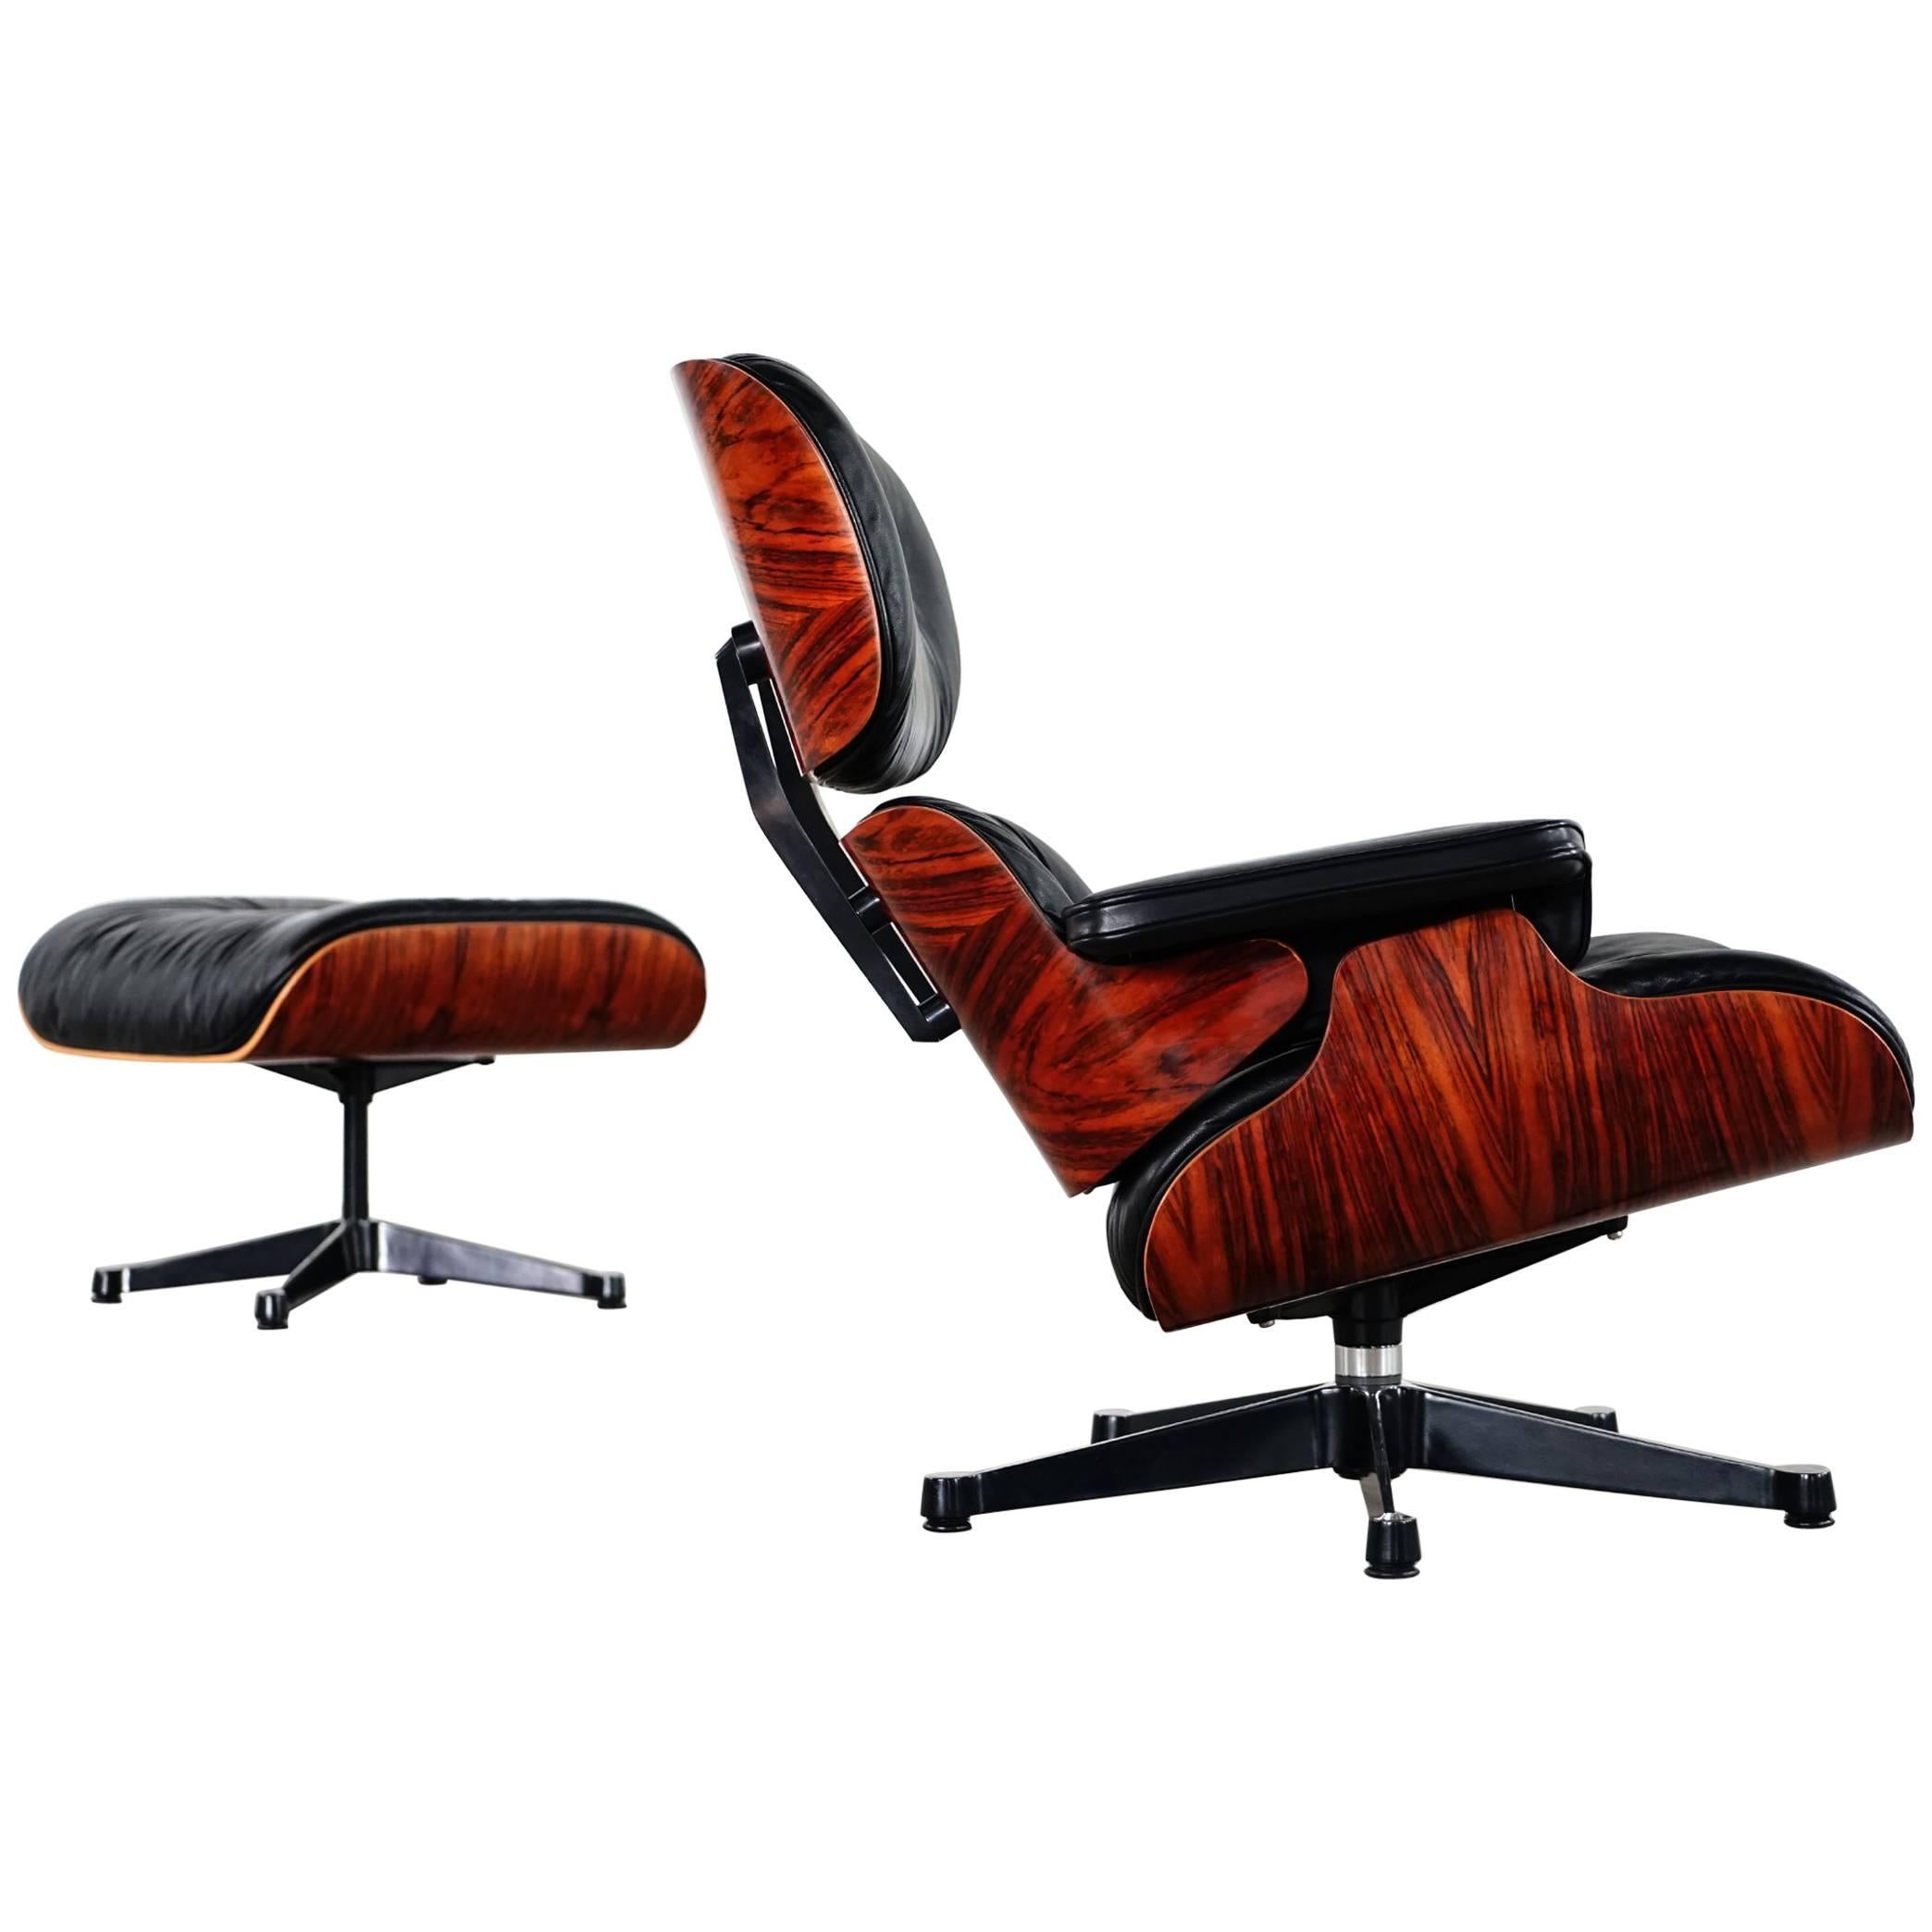 Vitra Charles Eames Lounge Chair and Ottoman in Rosewood by Vitra